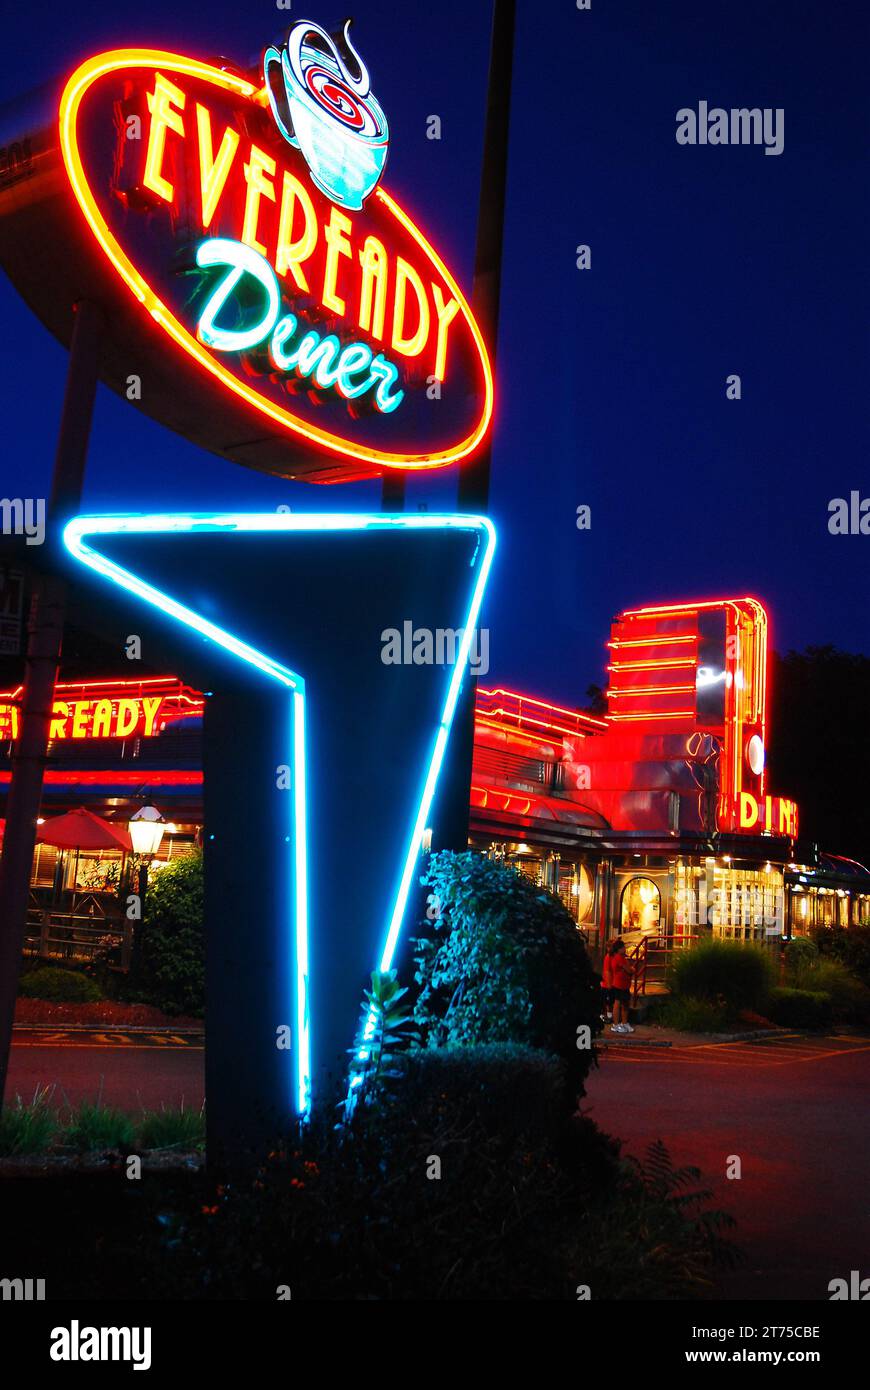 The neon sign of the Eveready Diner, in Hyde Park, New York, is illuminated against the dusk sky Stock Photo